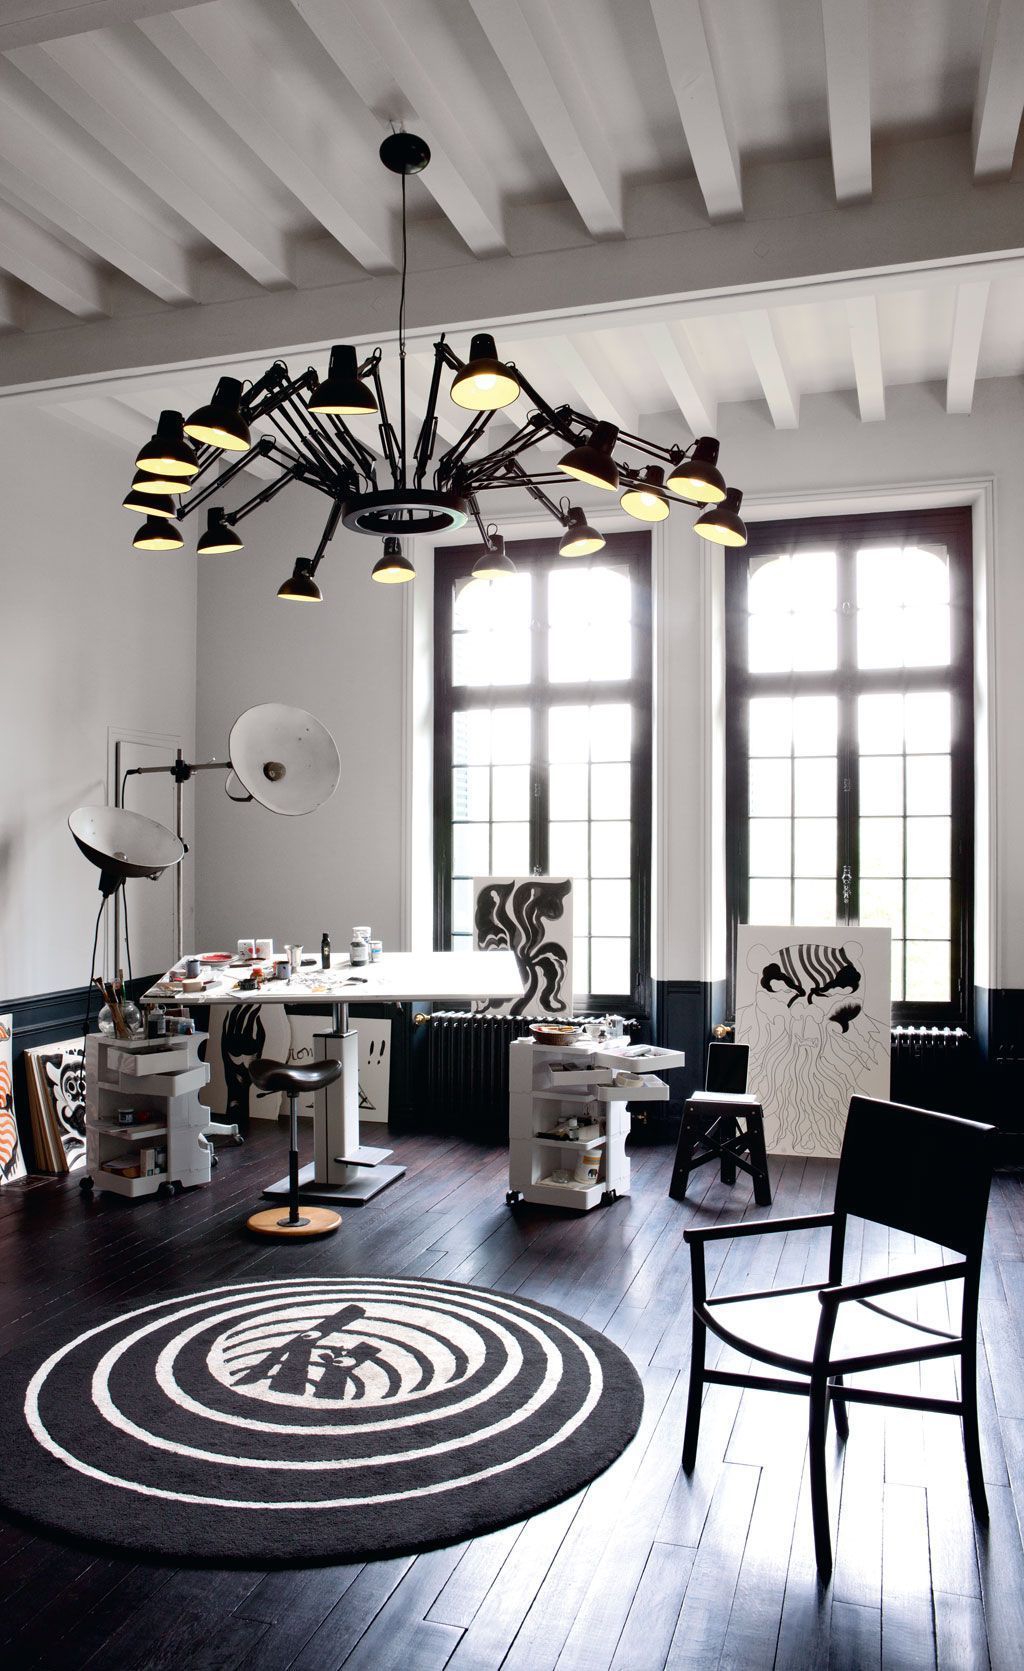 This is another studio space done in the same style, with the same lamps and similar decor